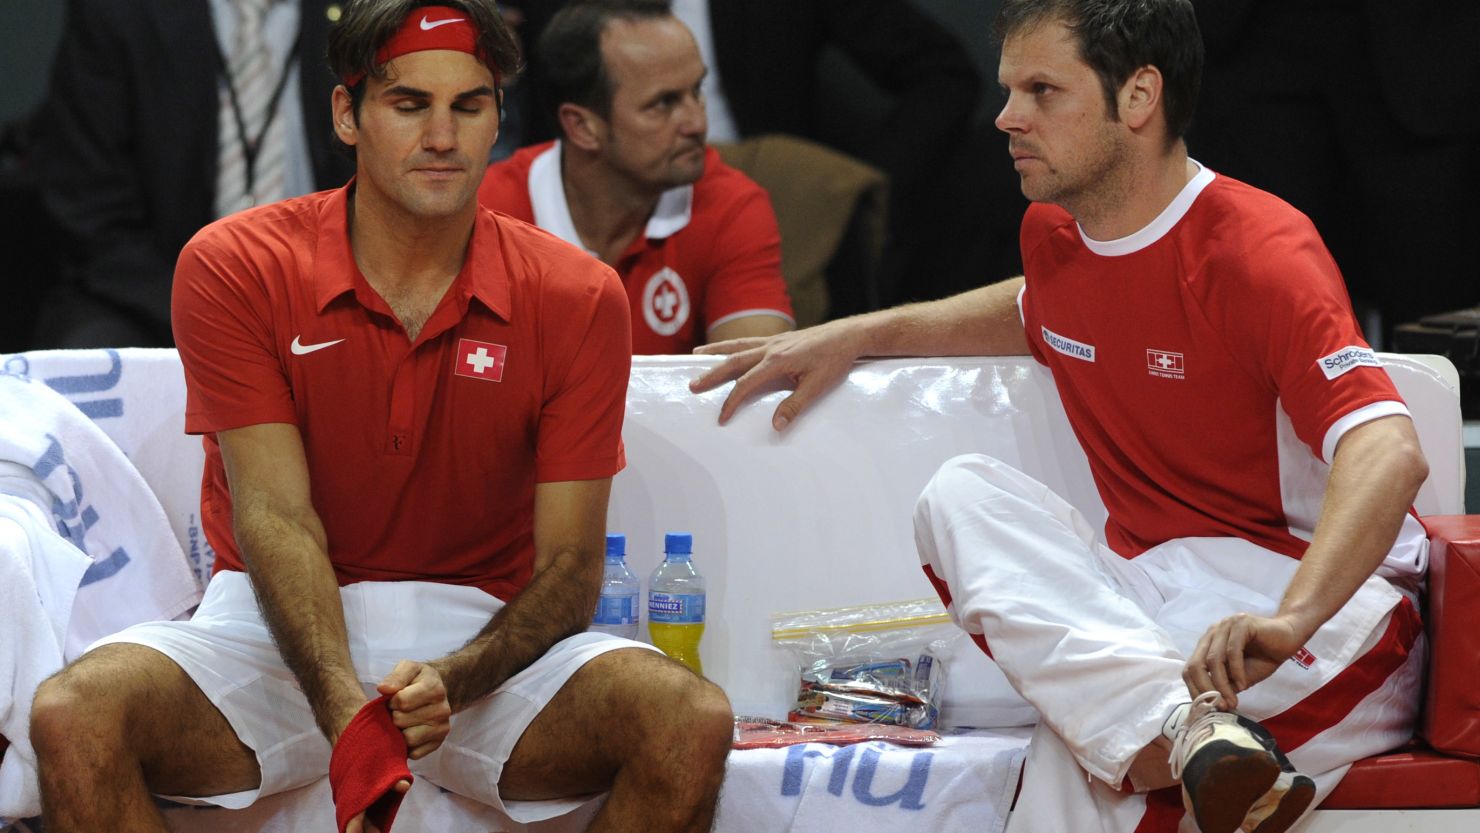 Roger Federer has endured a miserable two days losing his singles match on Friday and a doubles match on Saturday.